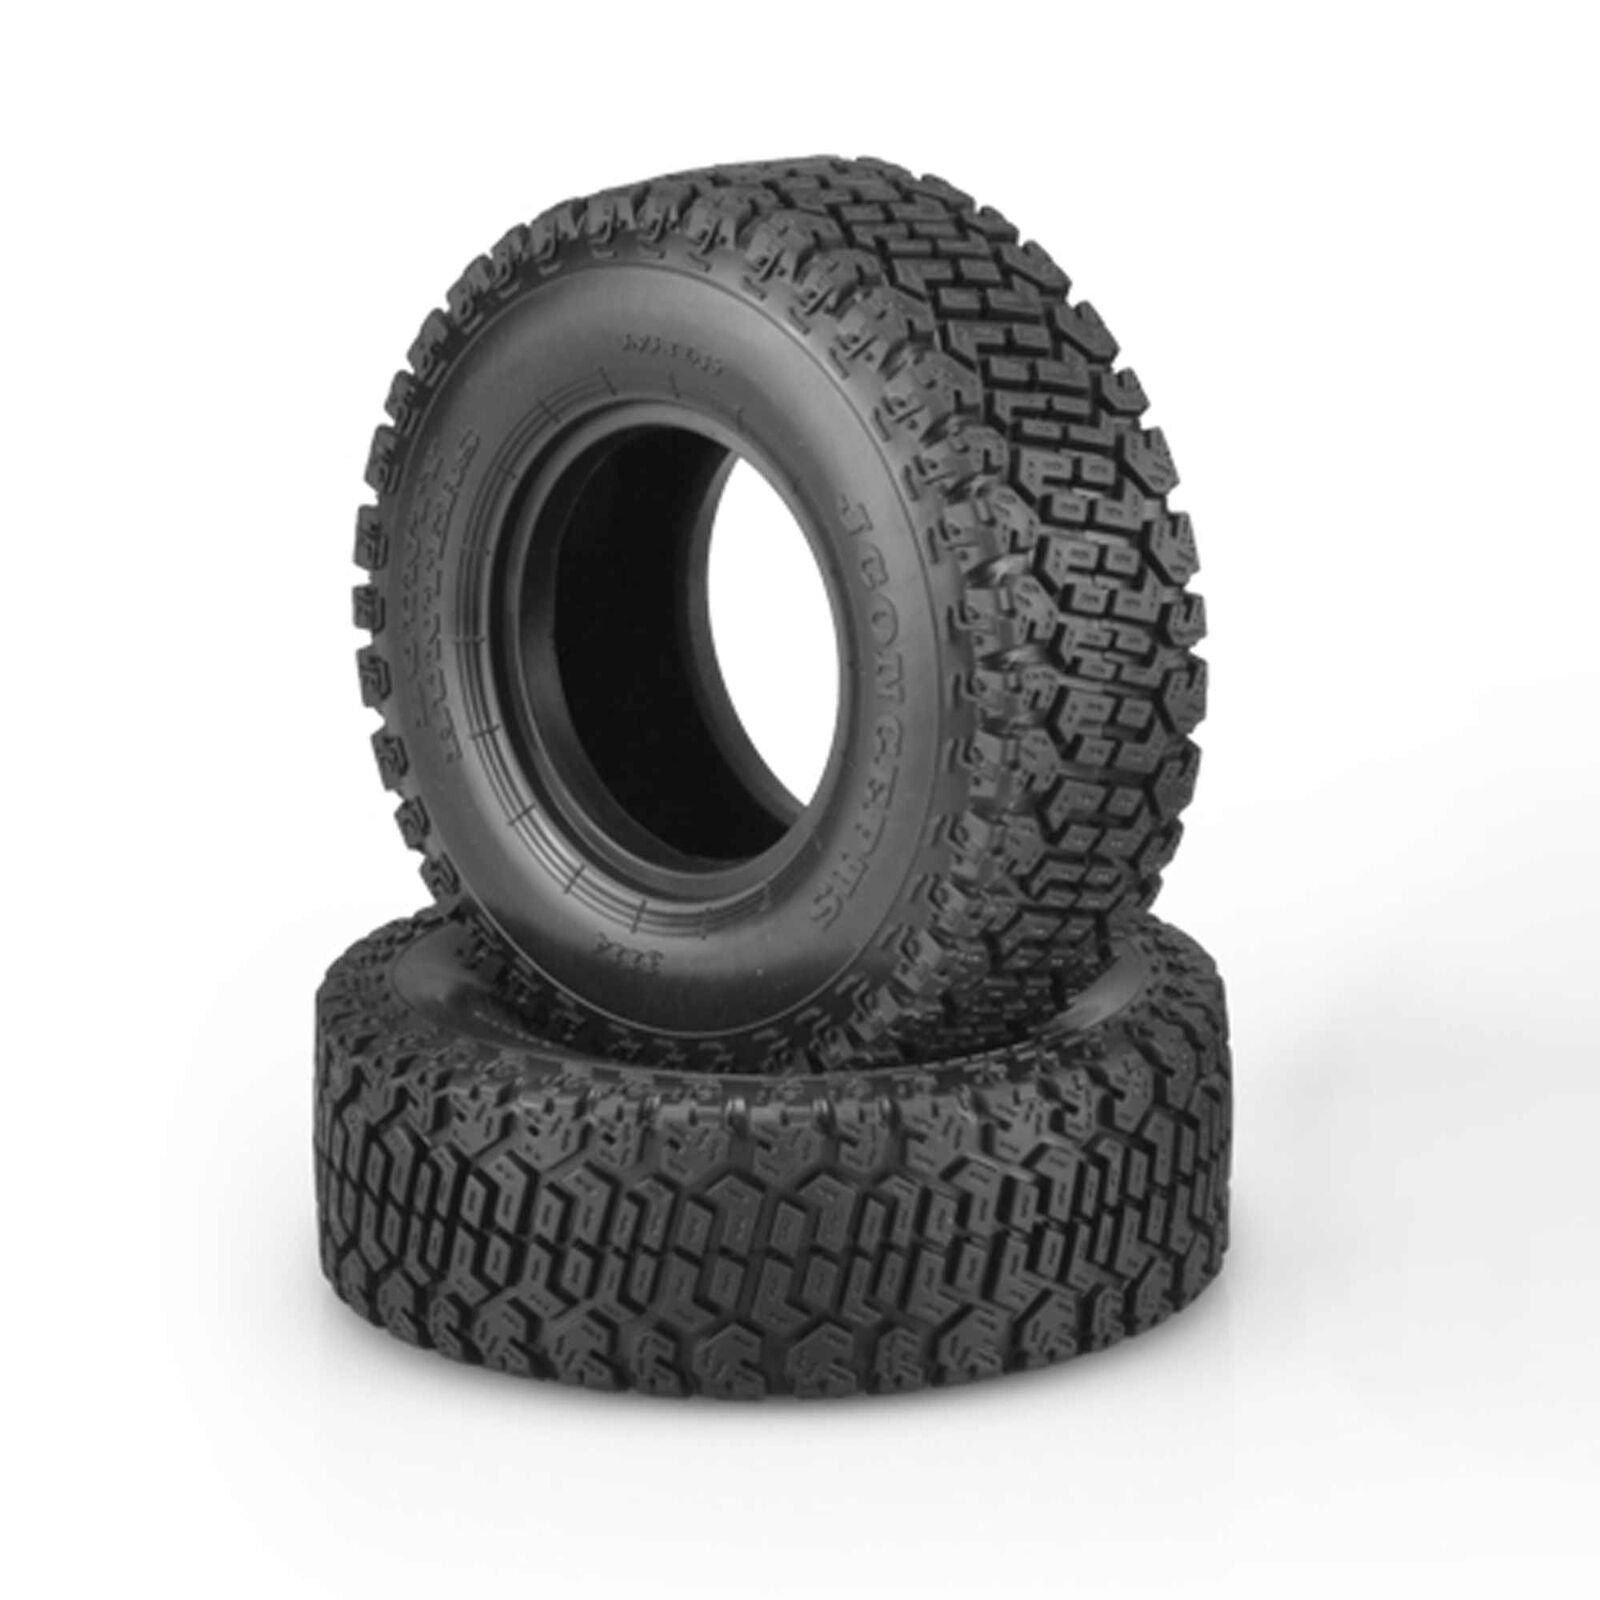 JCONCEPTS 3114-02 Bounty Hunters Green Compound 1.9 3.93" OD Scale Country Tires